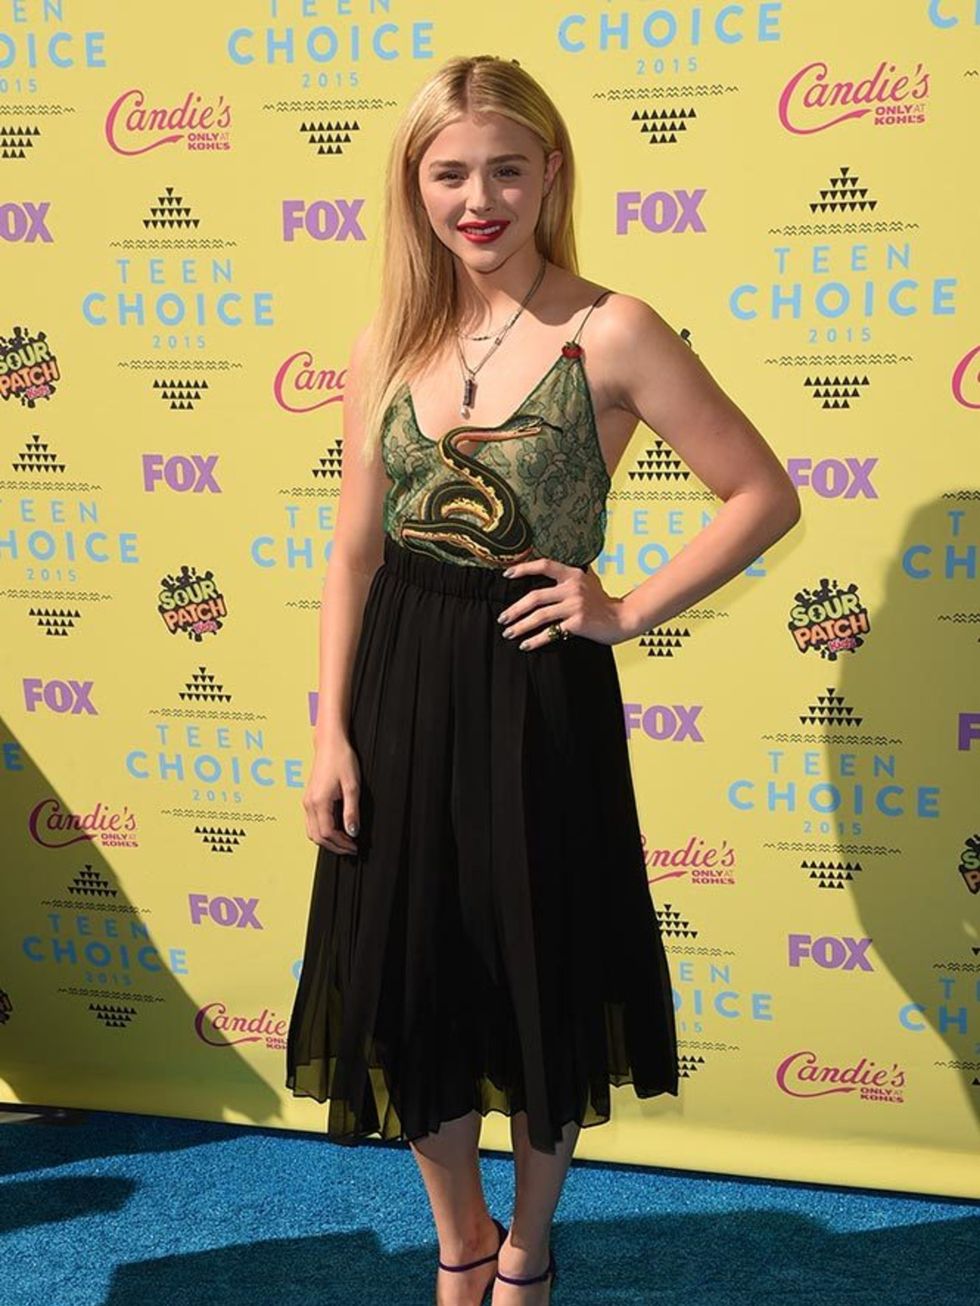 Chloe Moretz attends the Teen Choice Awards in LA, August 2015.